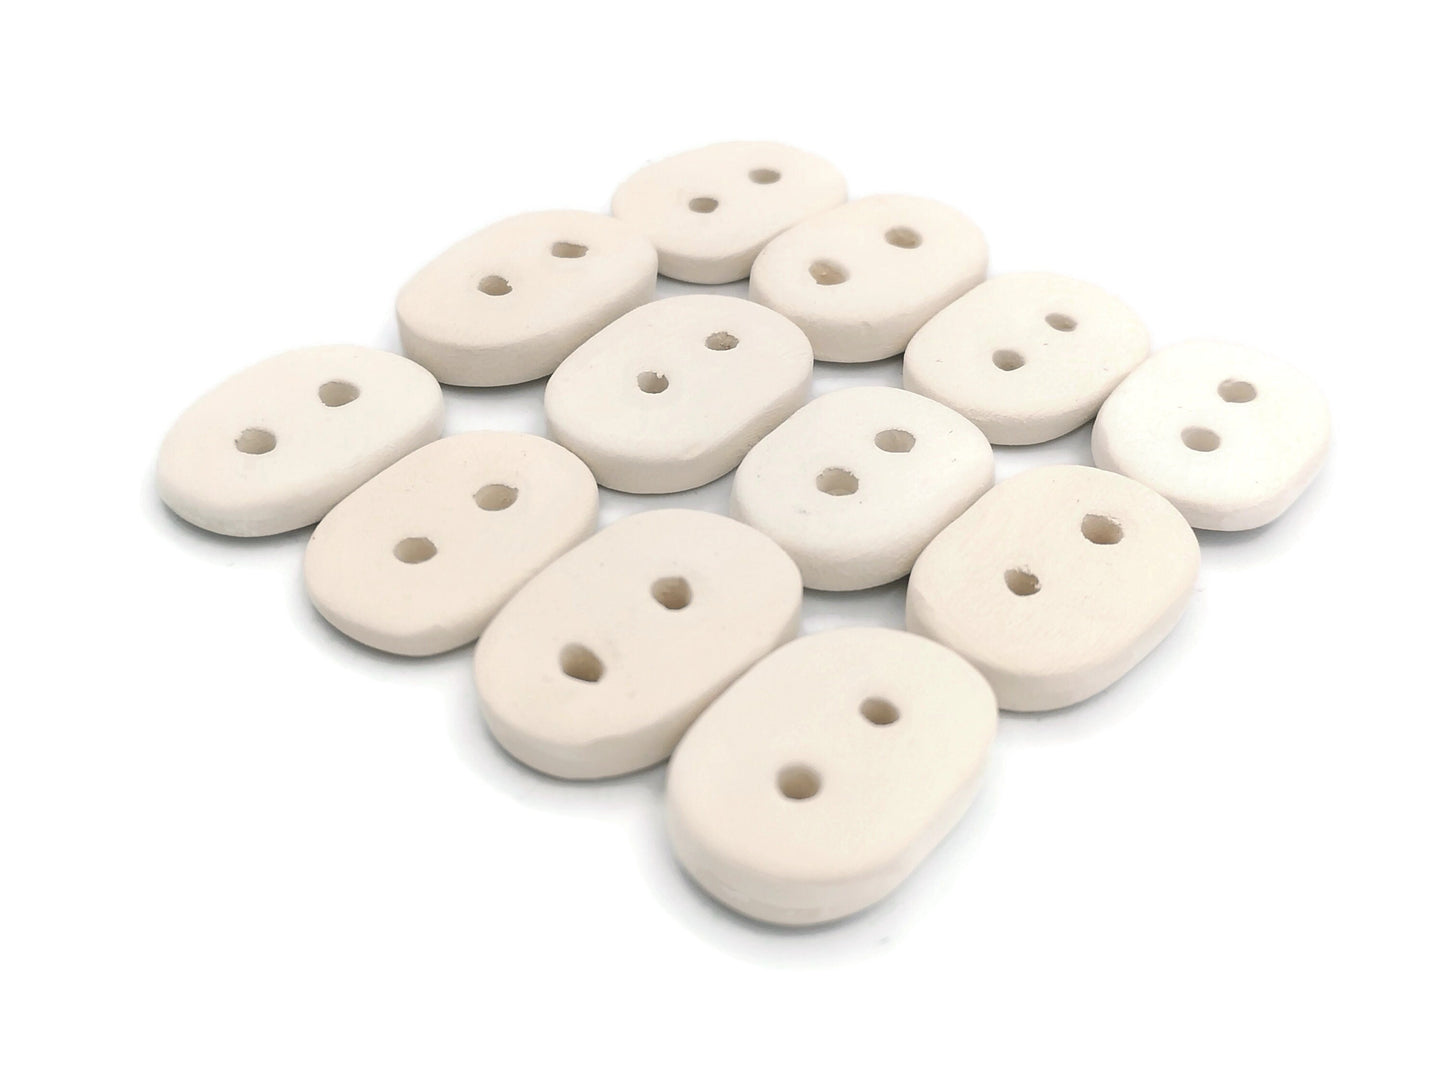 BLANK BUTTONS, CERAMIC Bisque Buttons Ready To Paint, 12 Pcs Large Buttons, Unpainted Coat Buttons, Handmade Sewing Supplies And Notions - Ceramica Ana Rafael